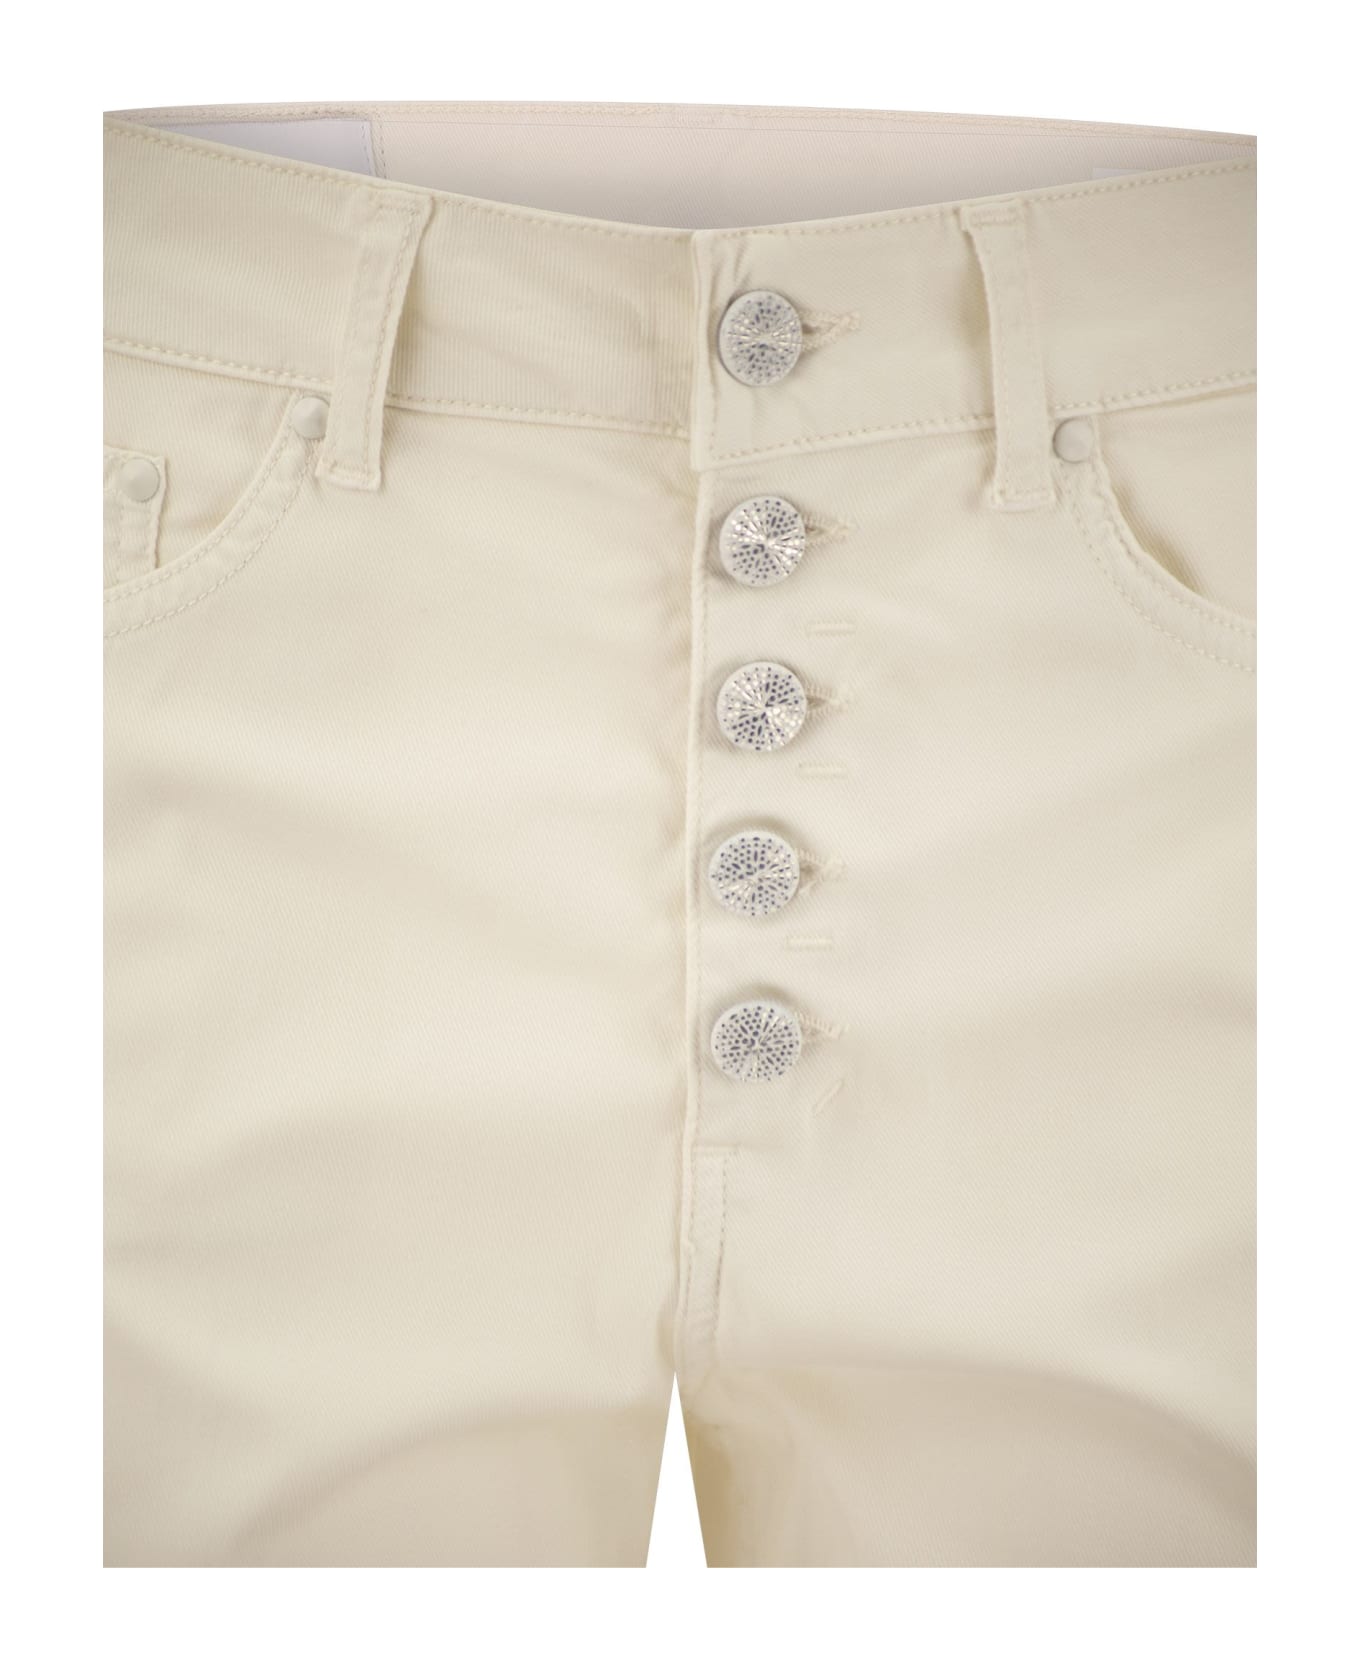 Dondup Cream-colored Jeans - Butter